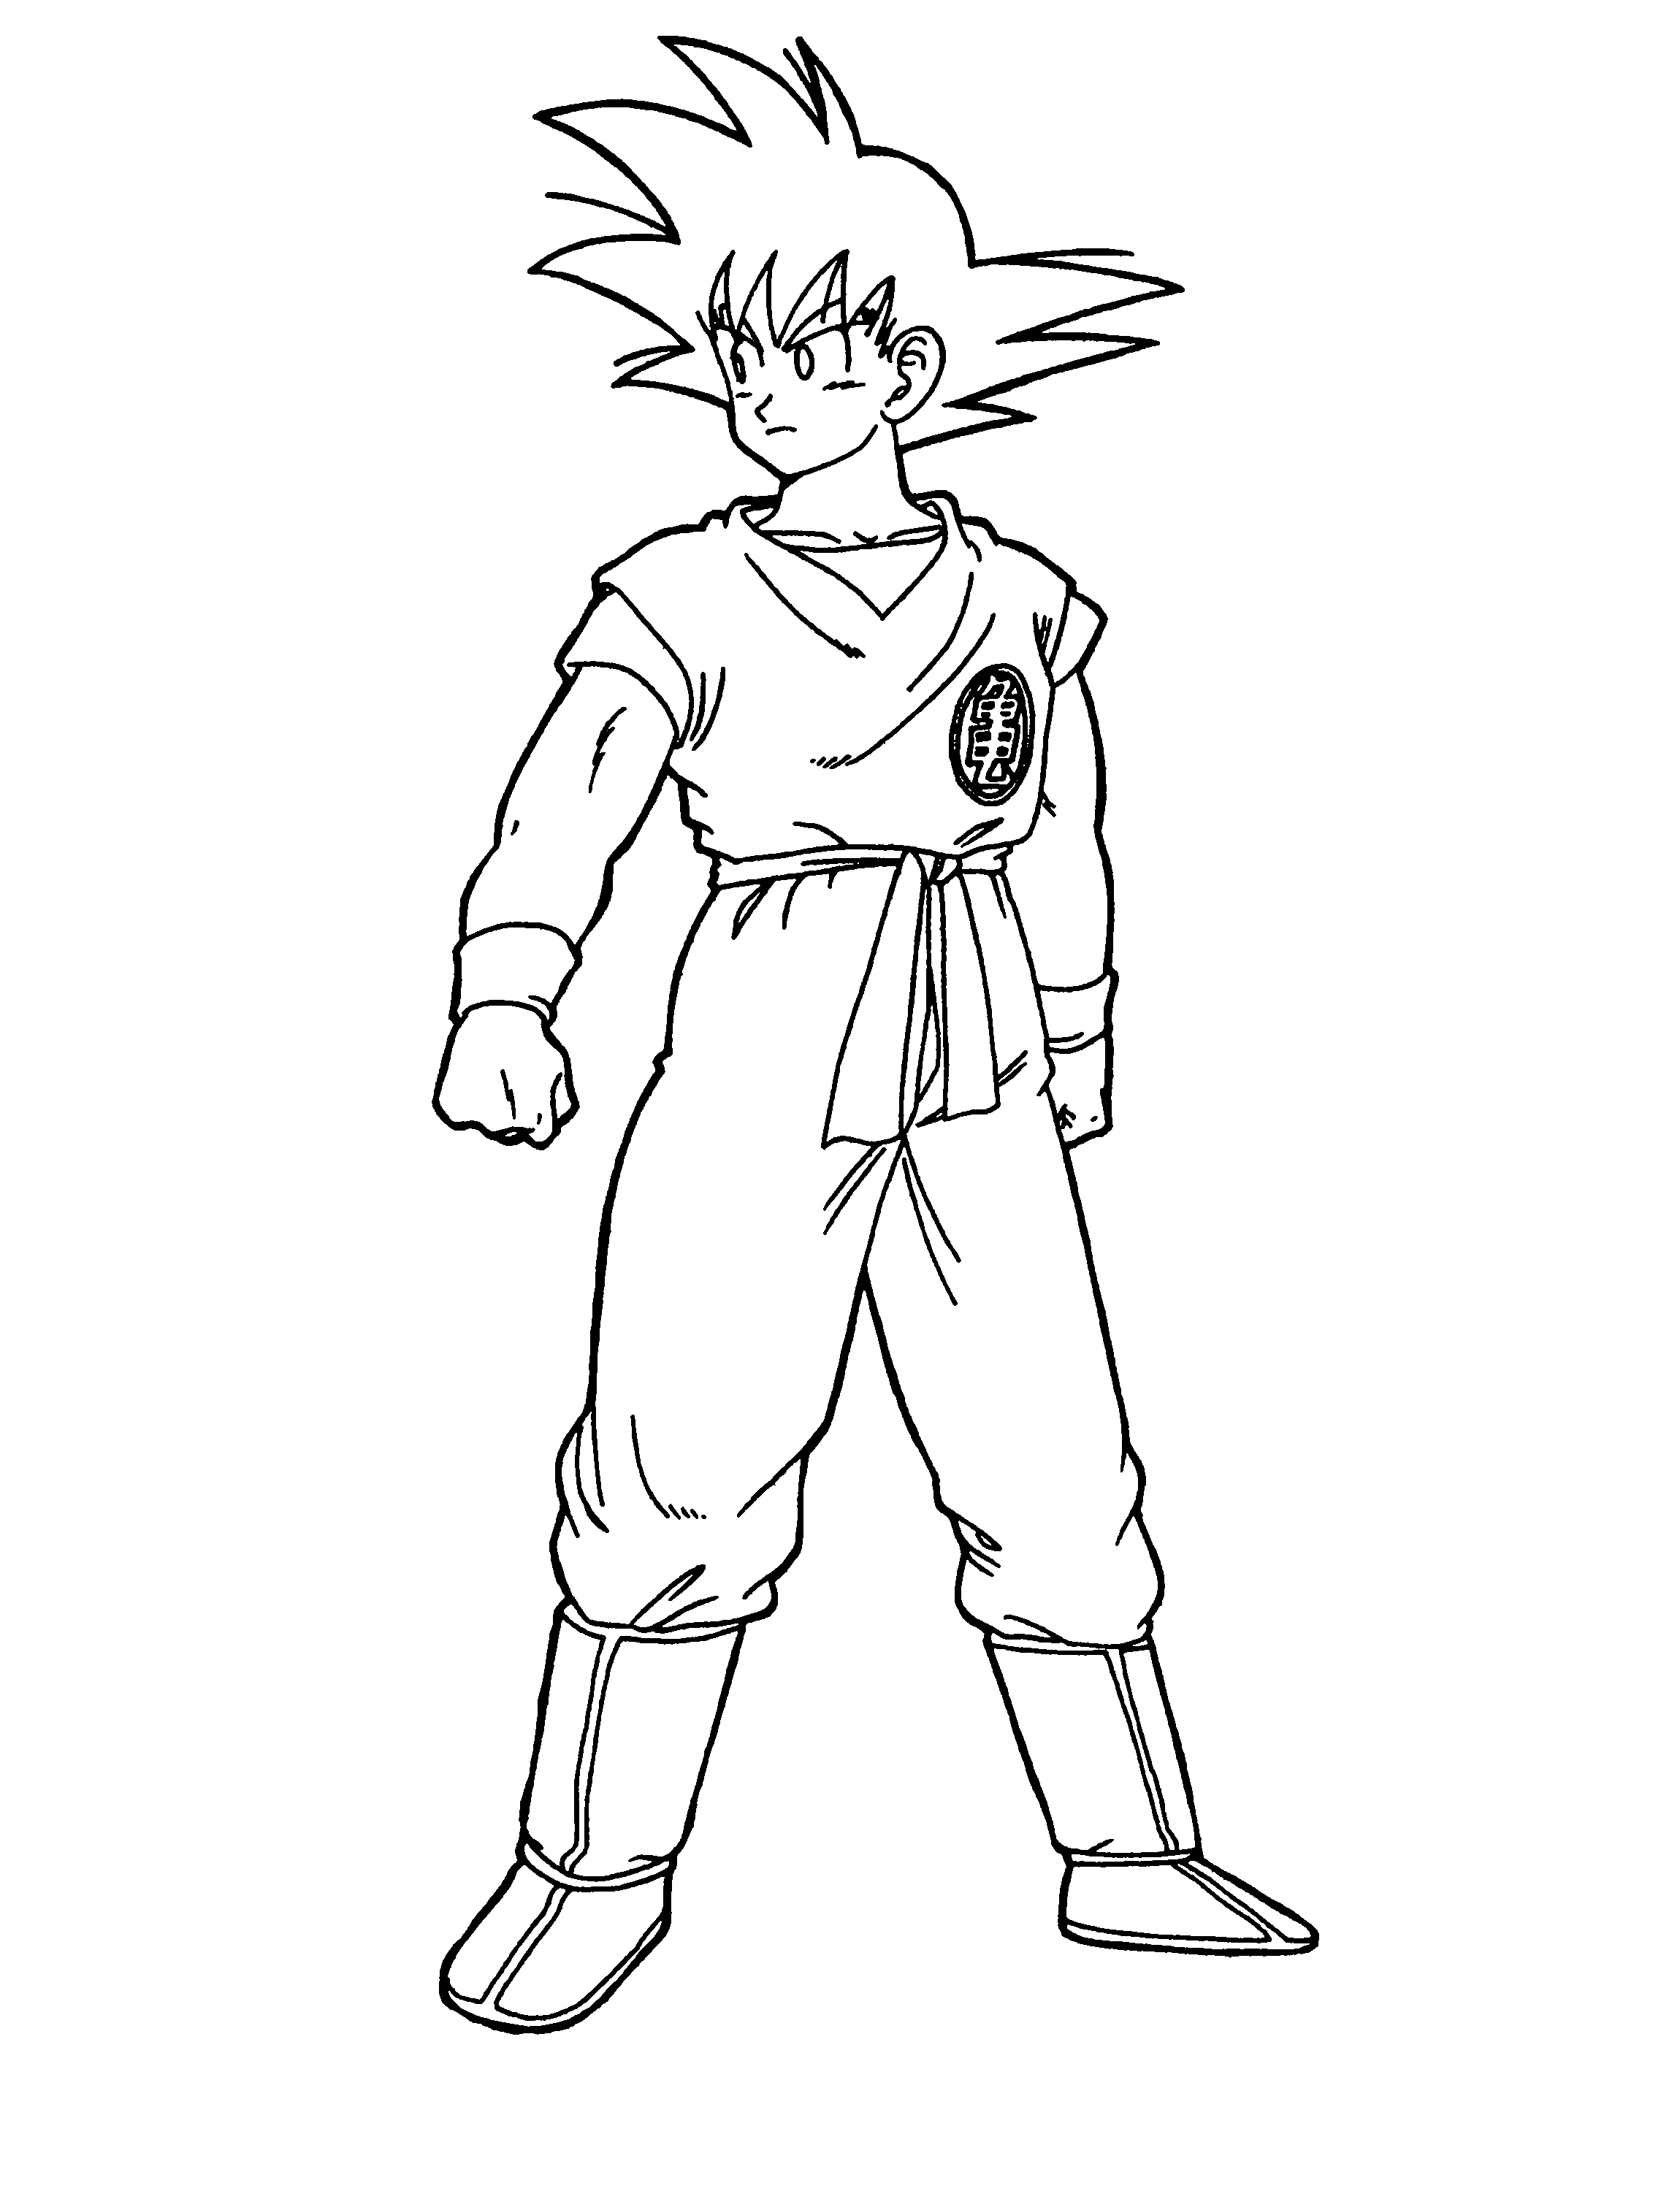 Awesome Goku And Vegeta Coloring Page - Free Printable Coloring Pages For  Kids - Coloring H…